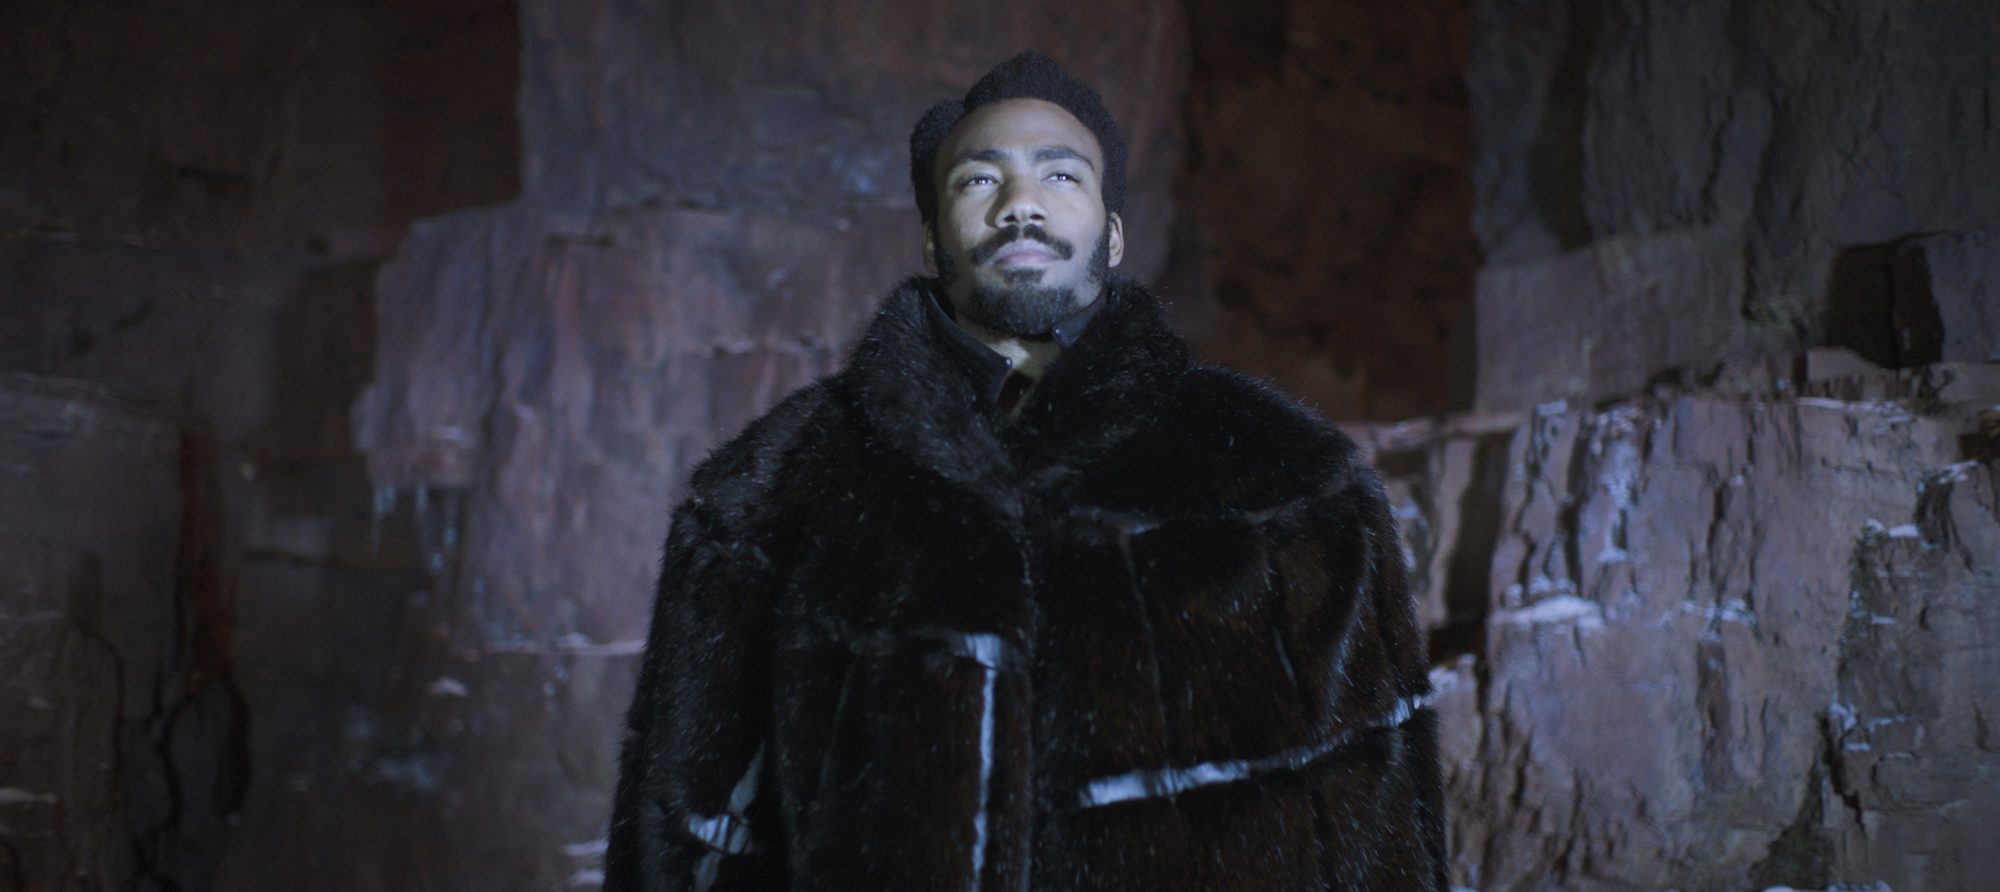 Donald Glover is Lando Calrissian in SOLO: A STAR WARS STORY. (Walt Disney Pictures)